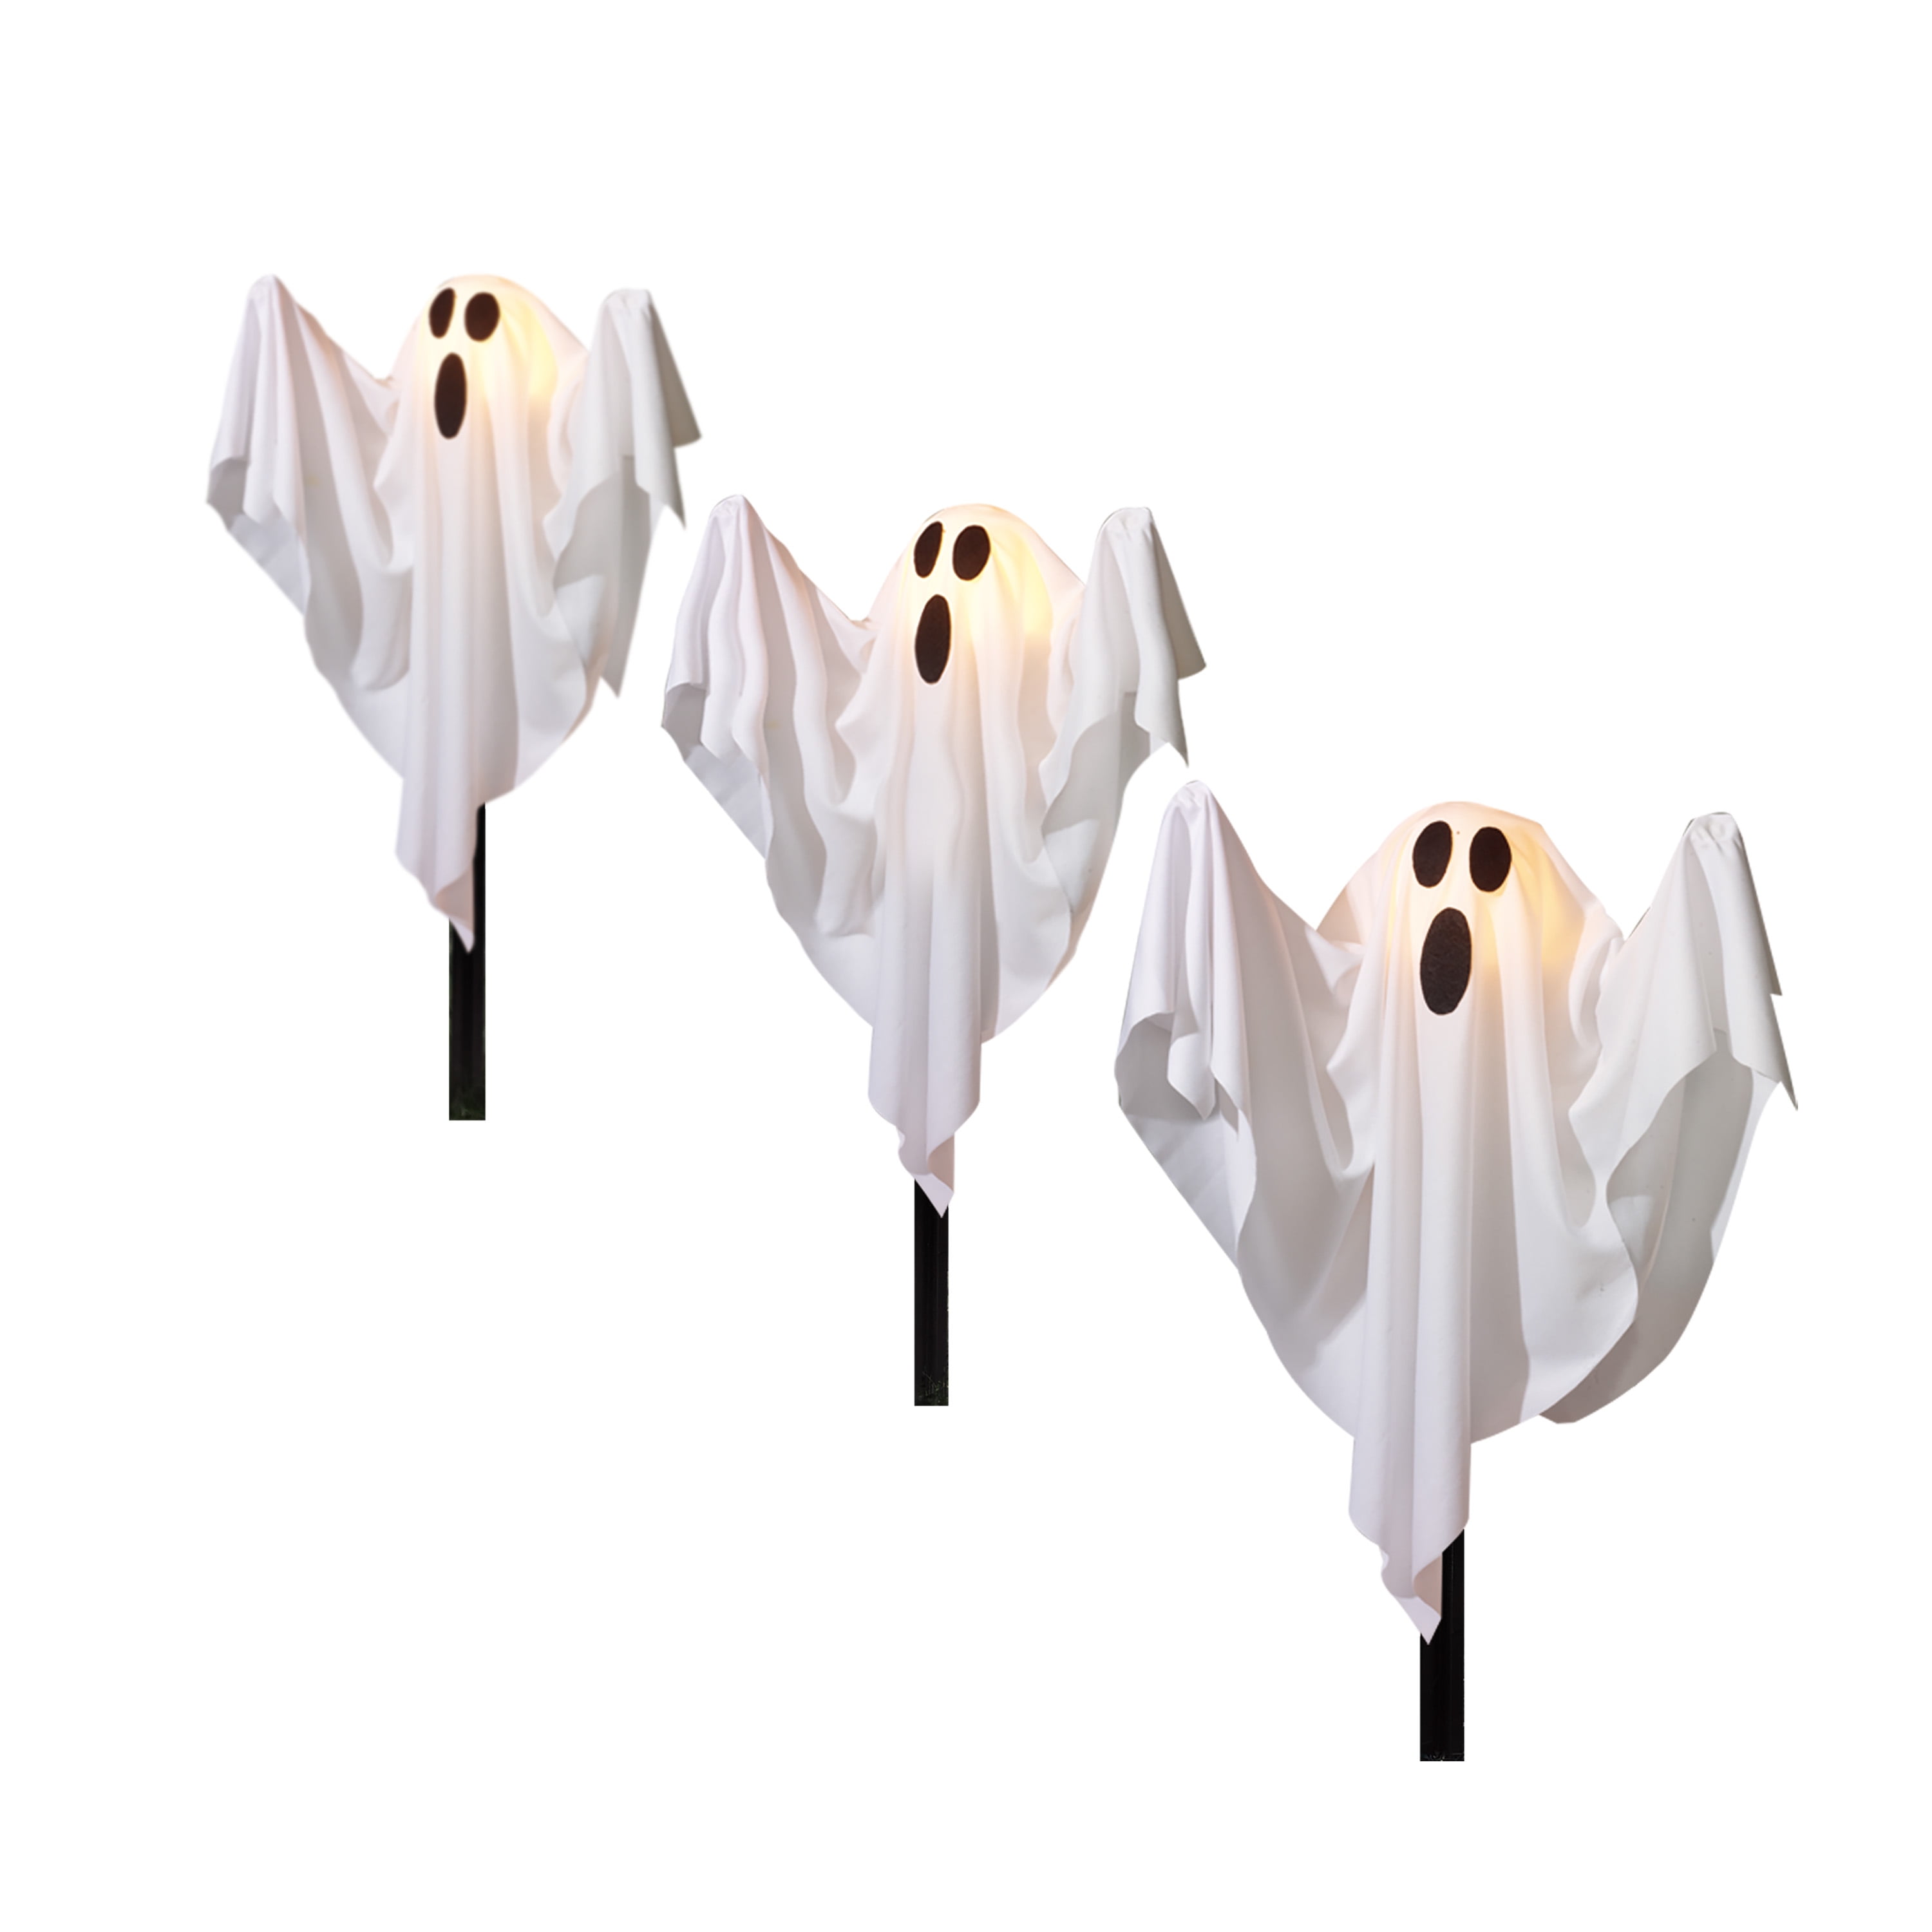 WAY TO CELEBRATE! Way to Celebrate Halloween 3-Piece Outdoor Fabric Light-up Ghost Lawn Stakes, White